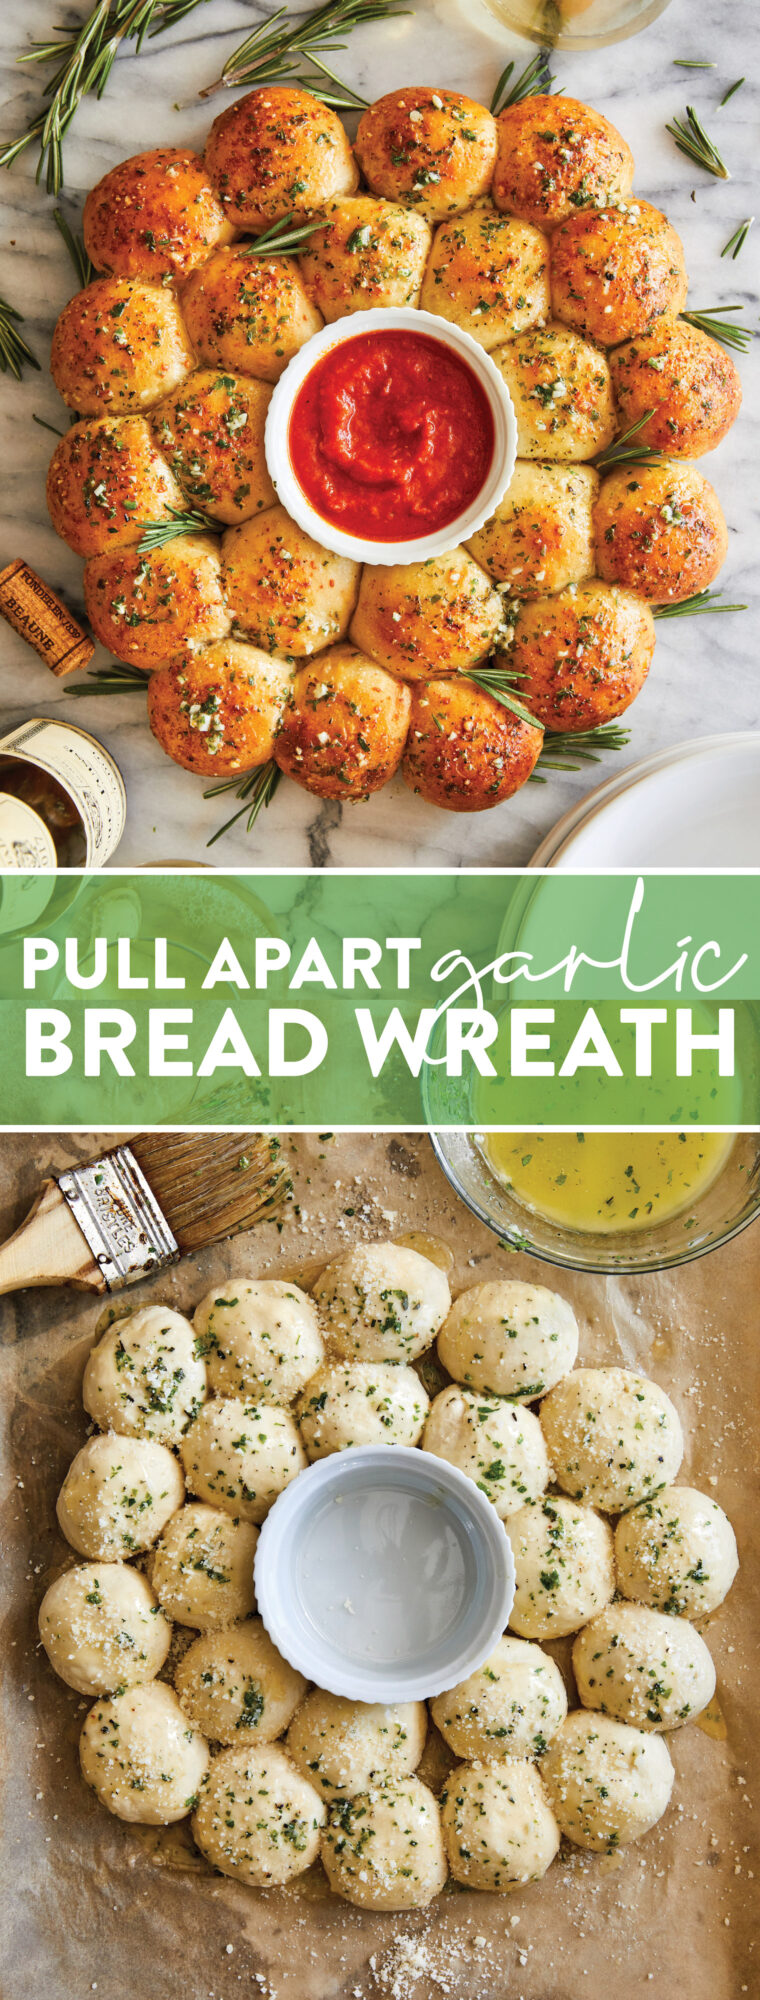 Pull Apart Garlic Bread Wreath - Warm, soft, pillowy bread bites smothered in garlicky, buttery heavenly goodness. An absolute crowd-pleaser!